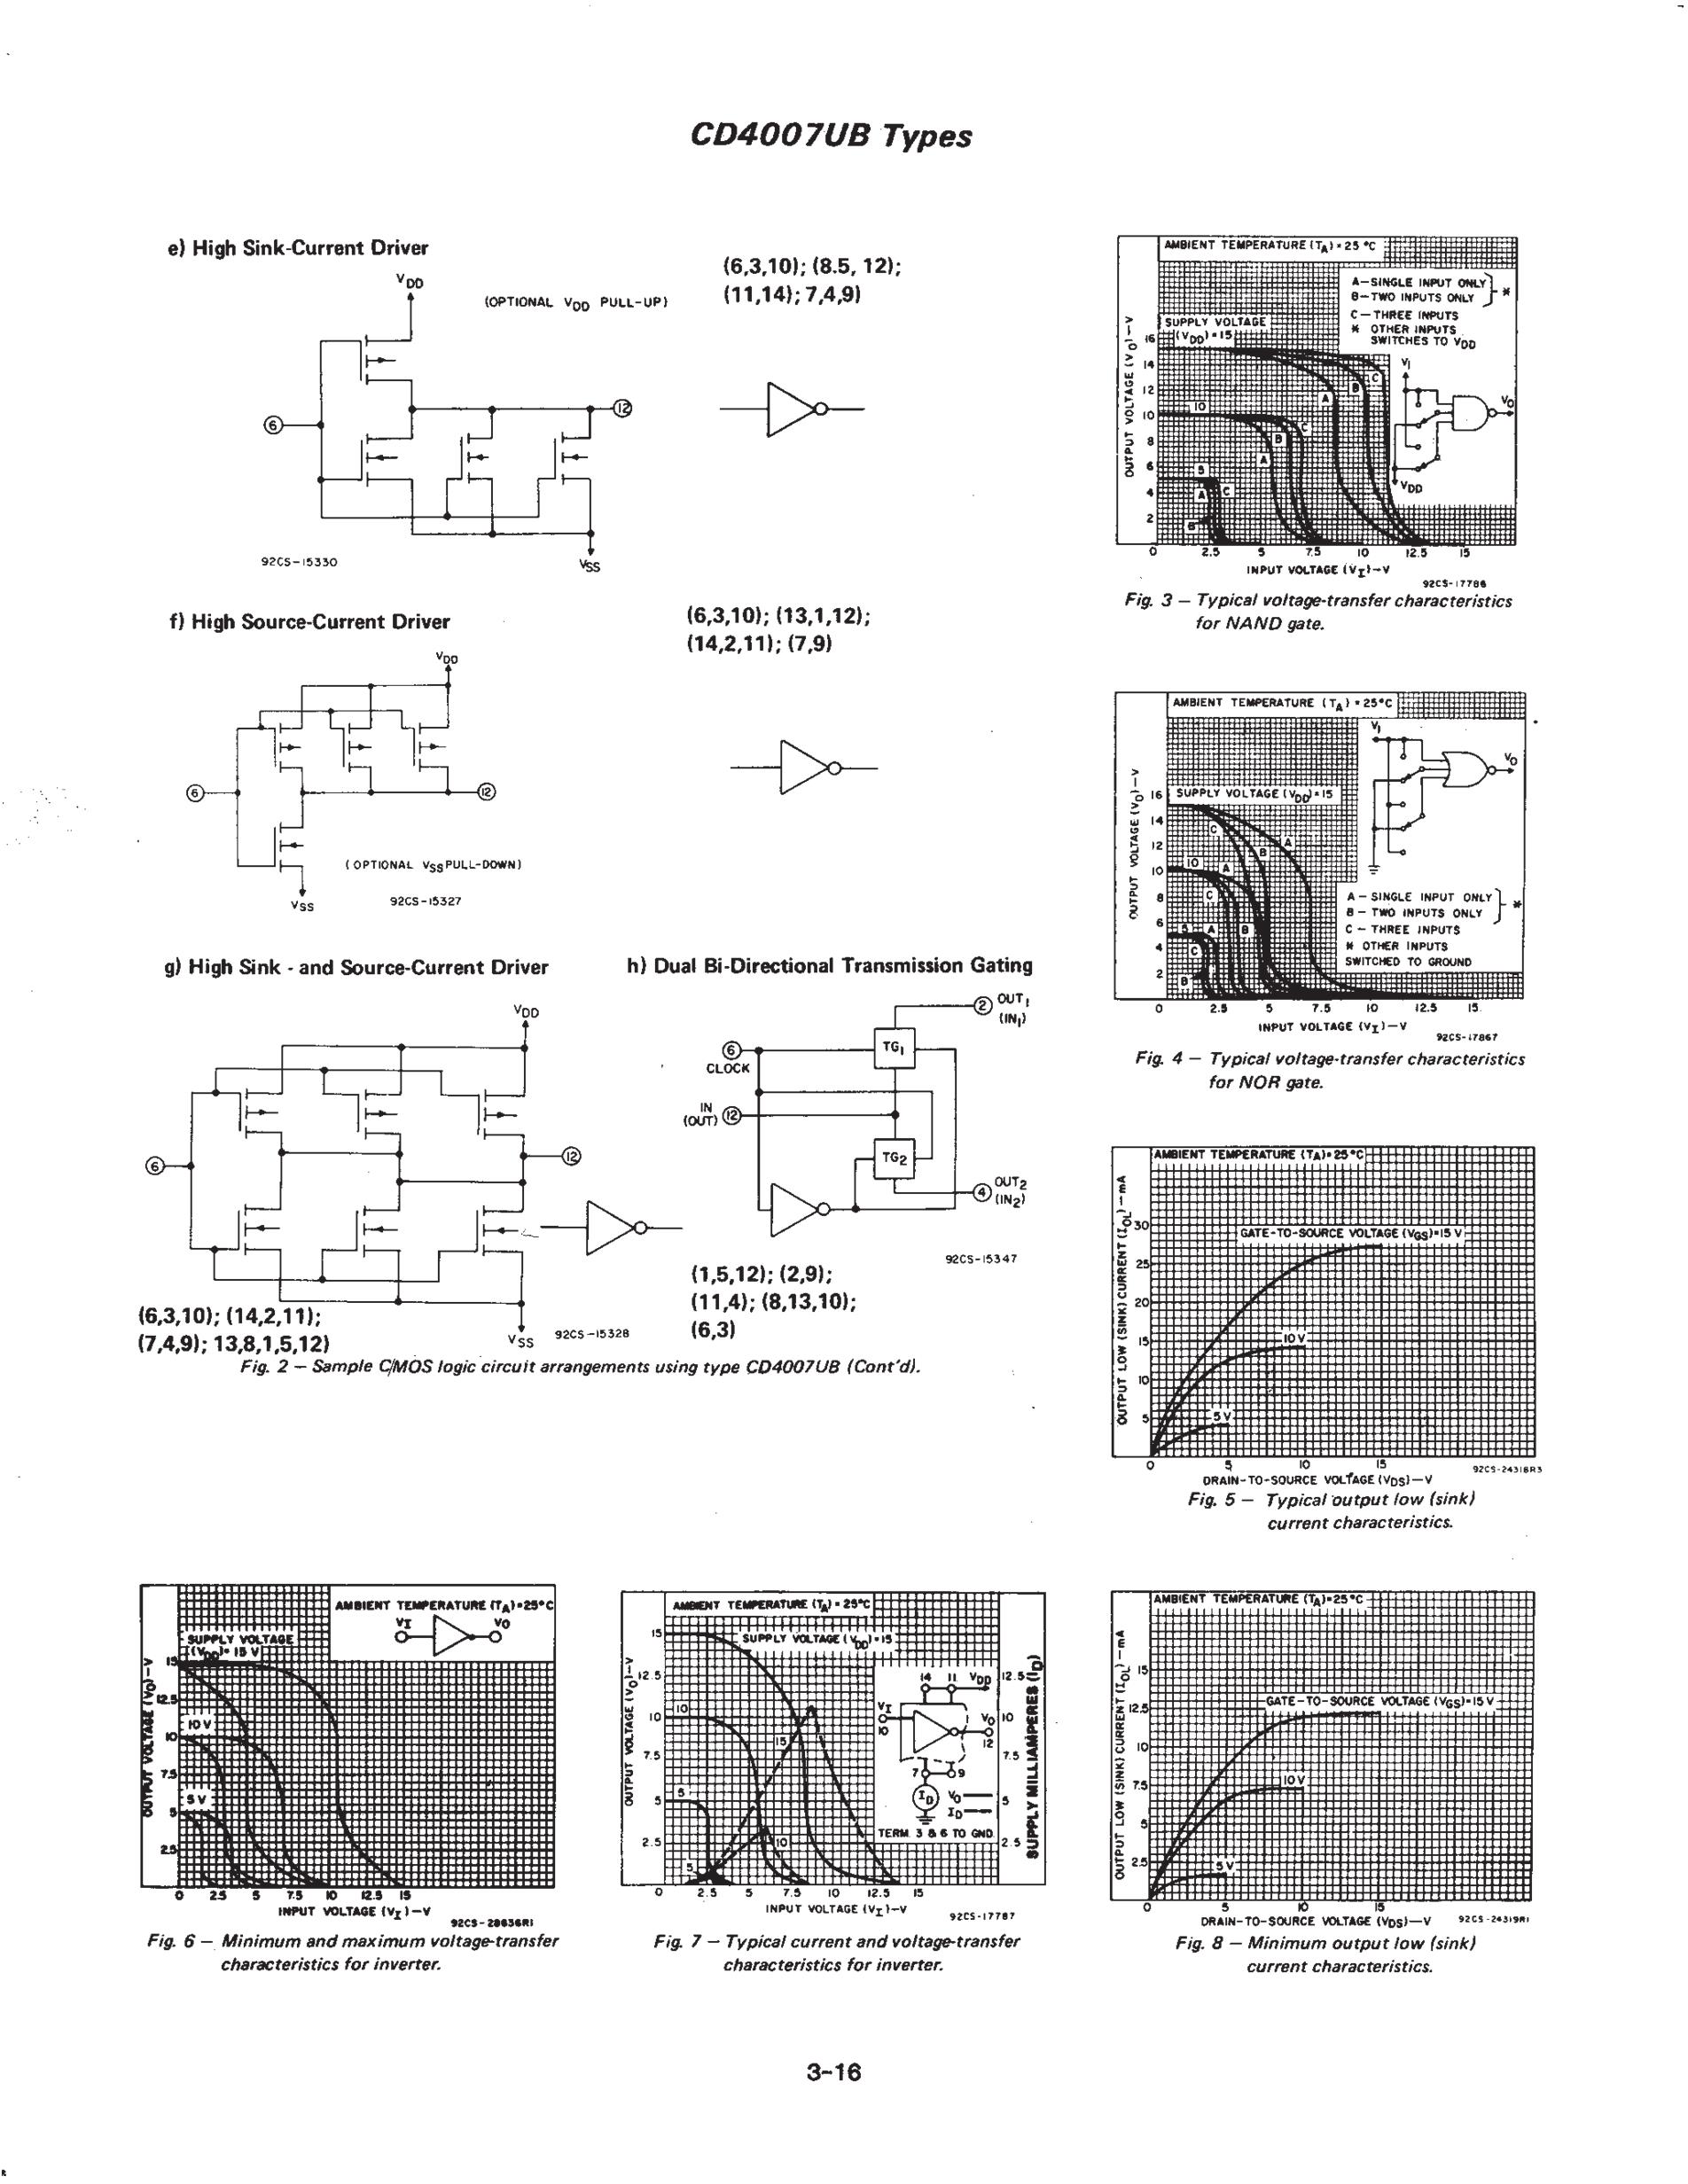 CD4001UBPWR's pdf picture 3